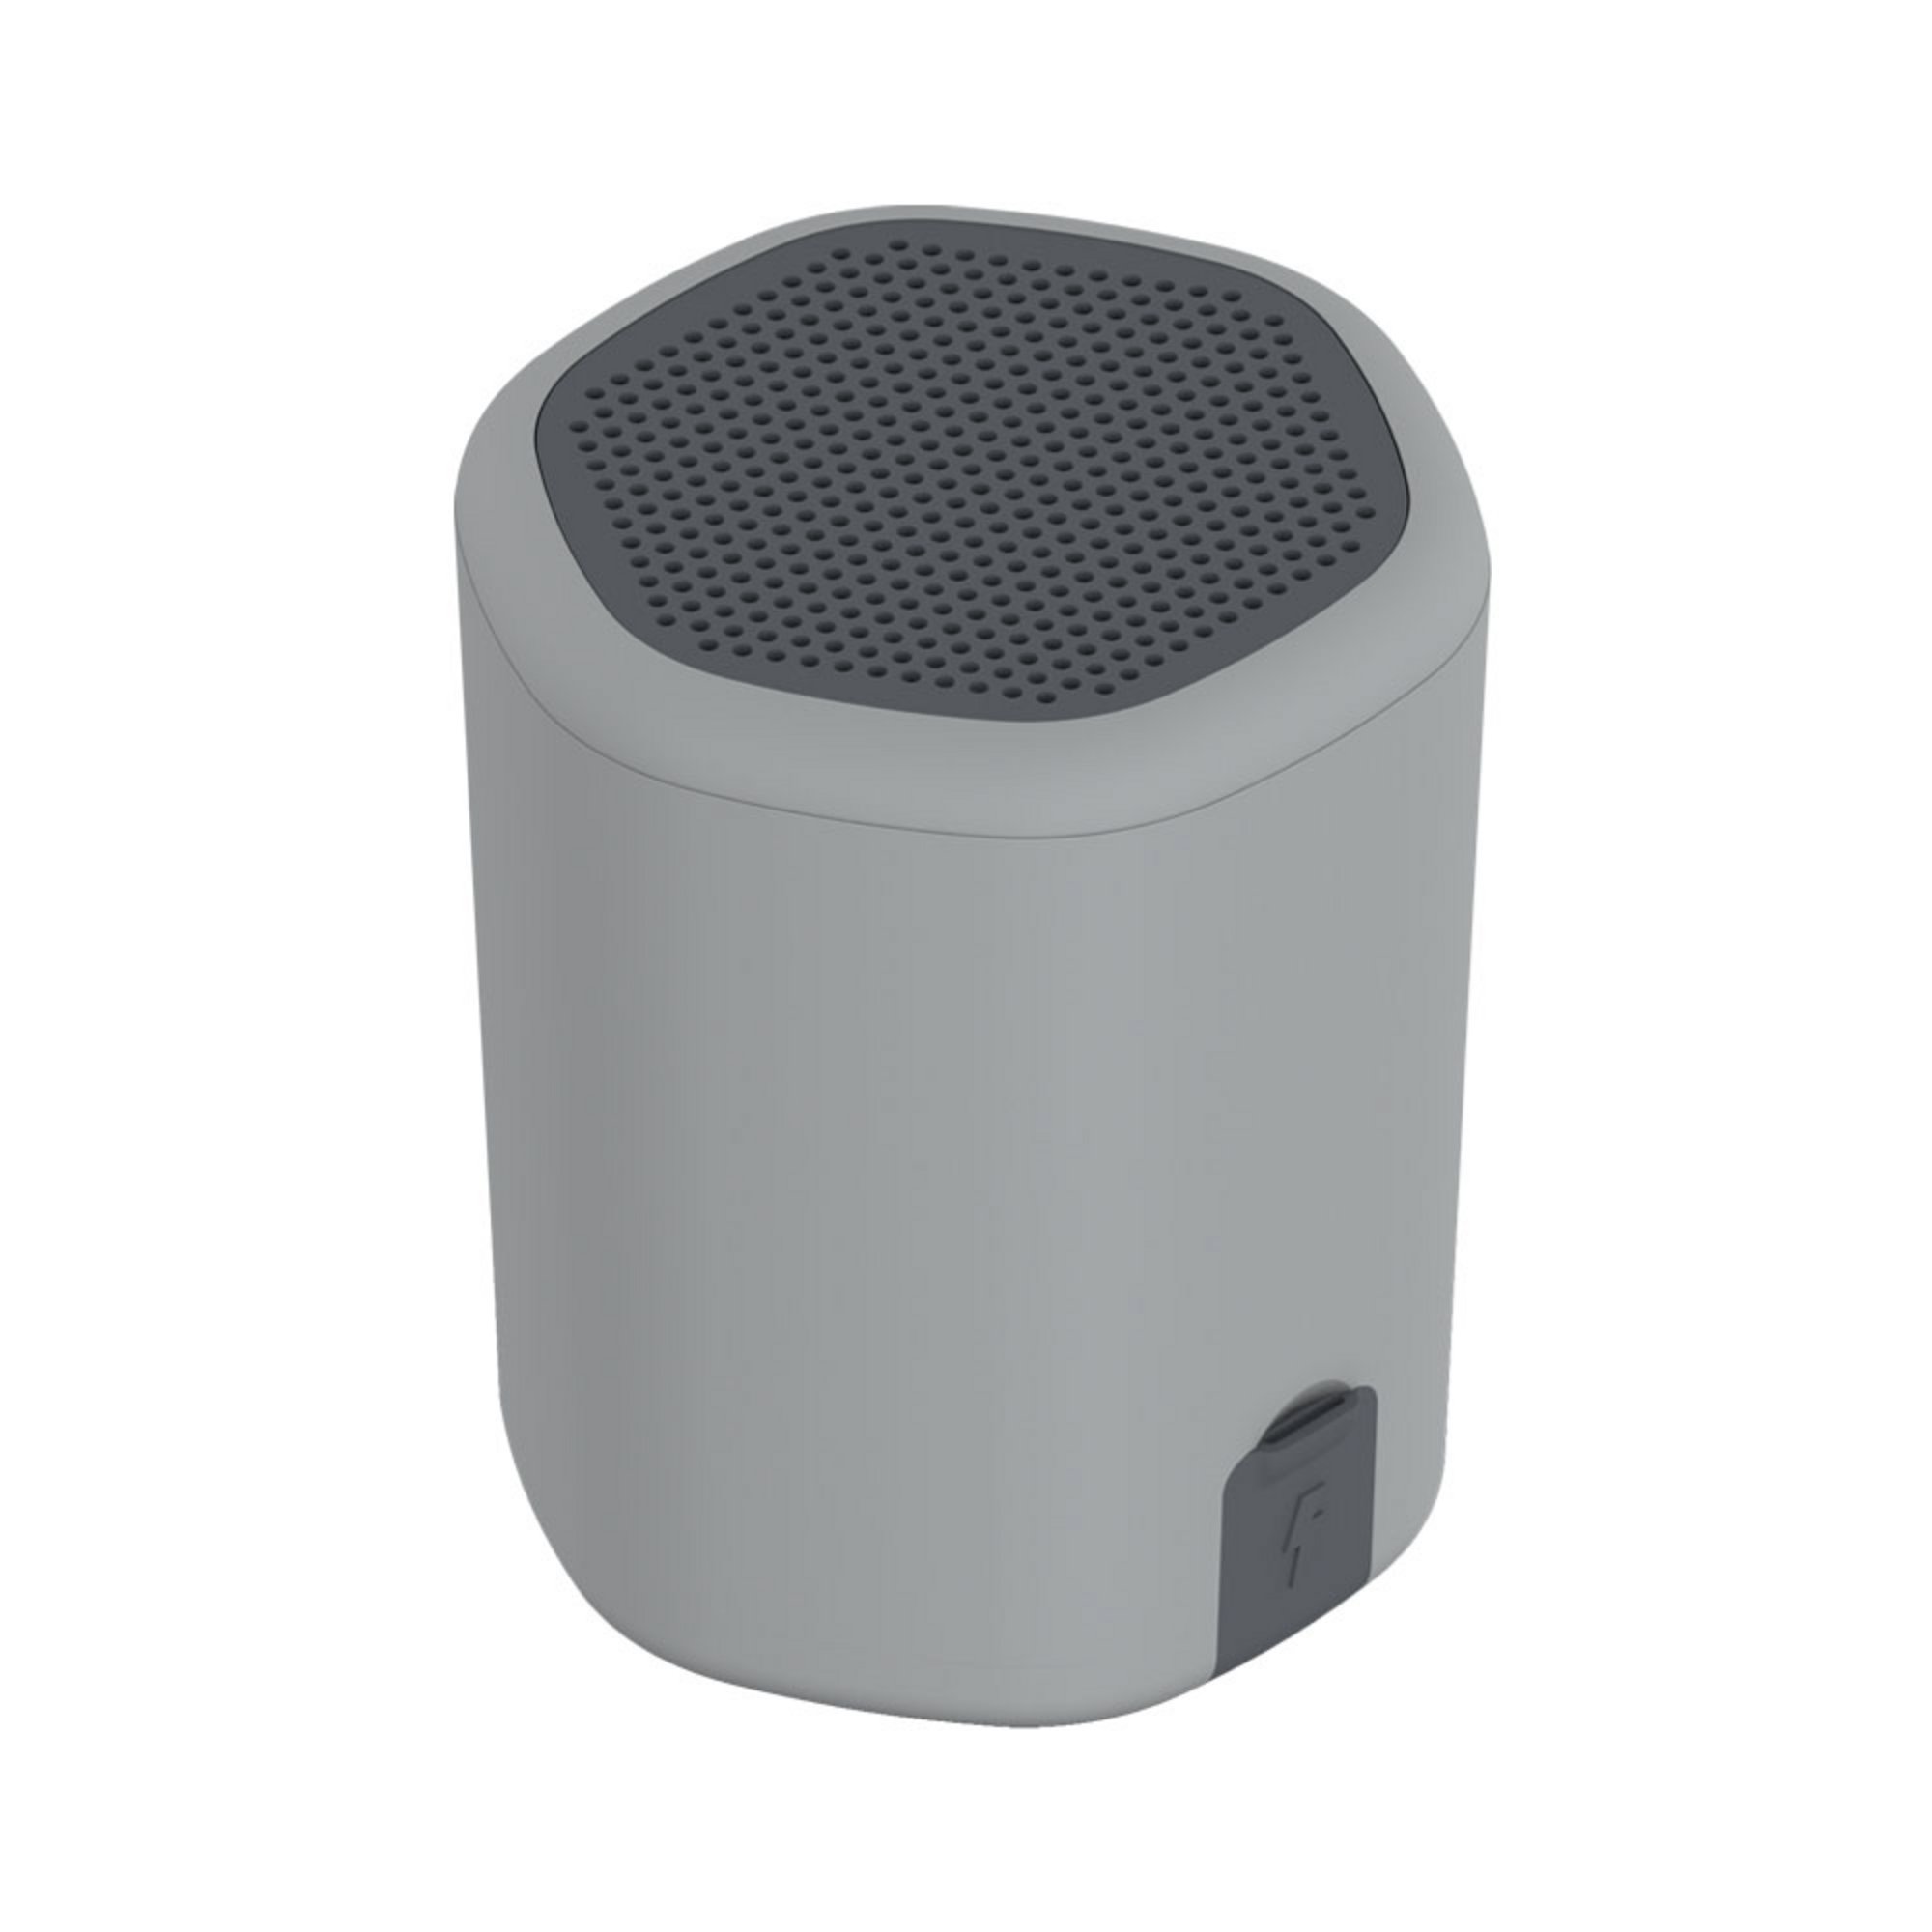 View more Hive 2.0 Bluetooth Speaker Grey details!!